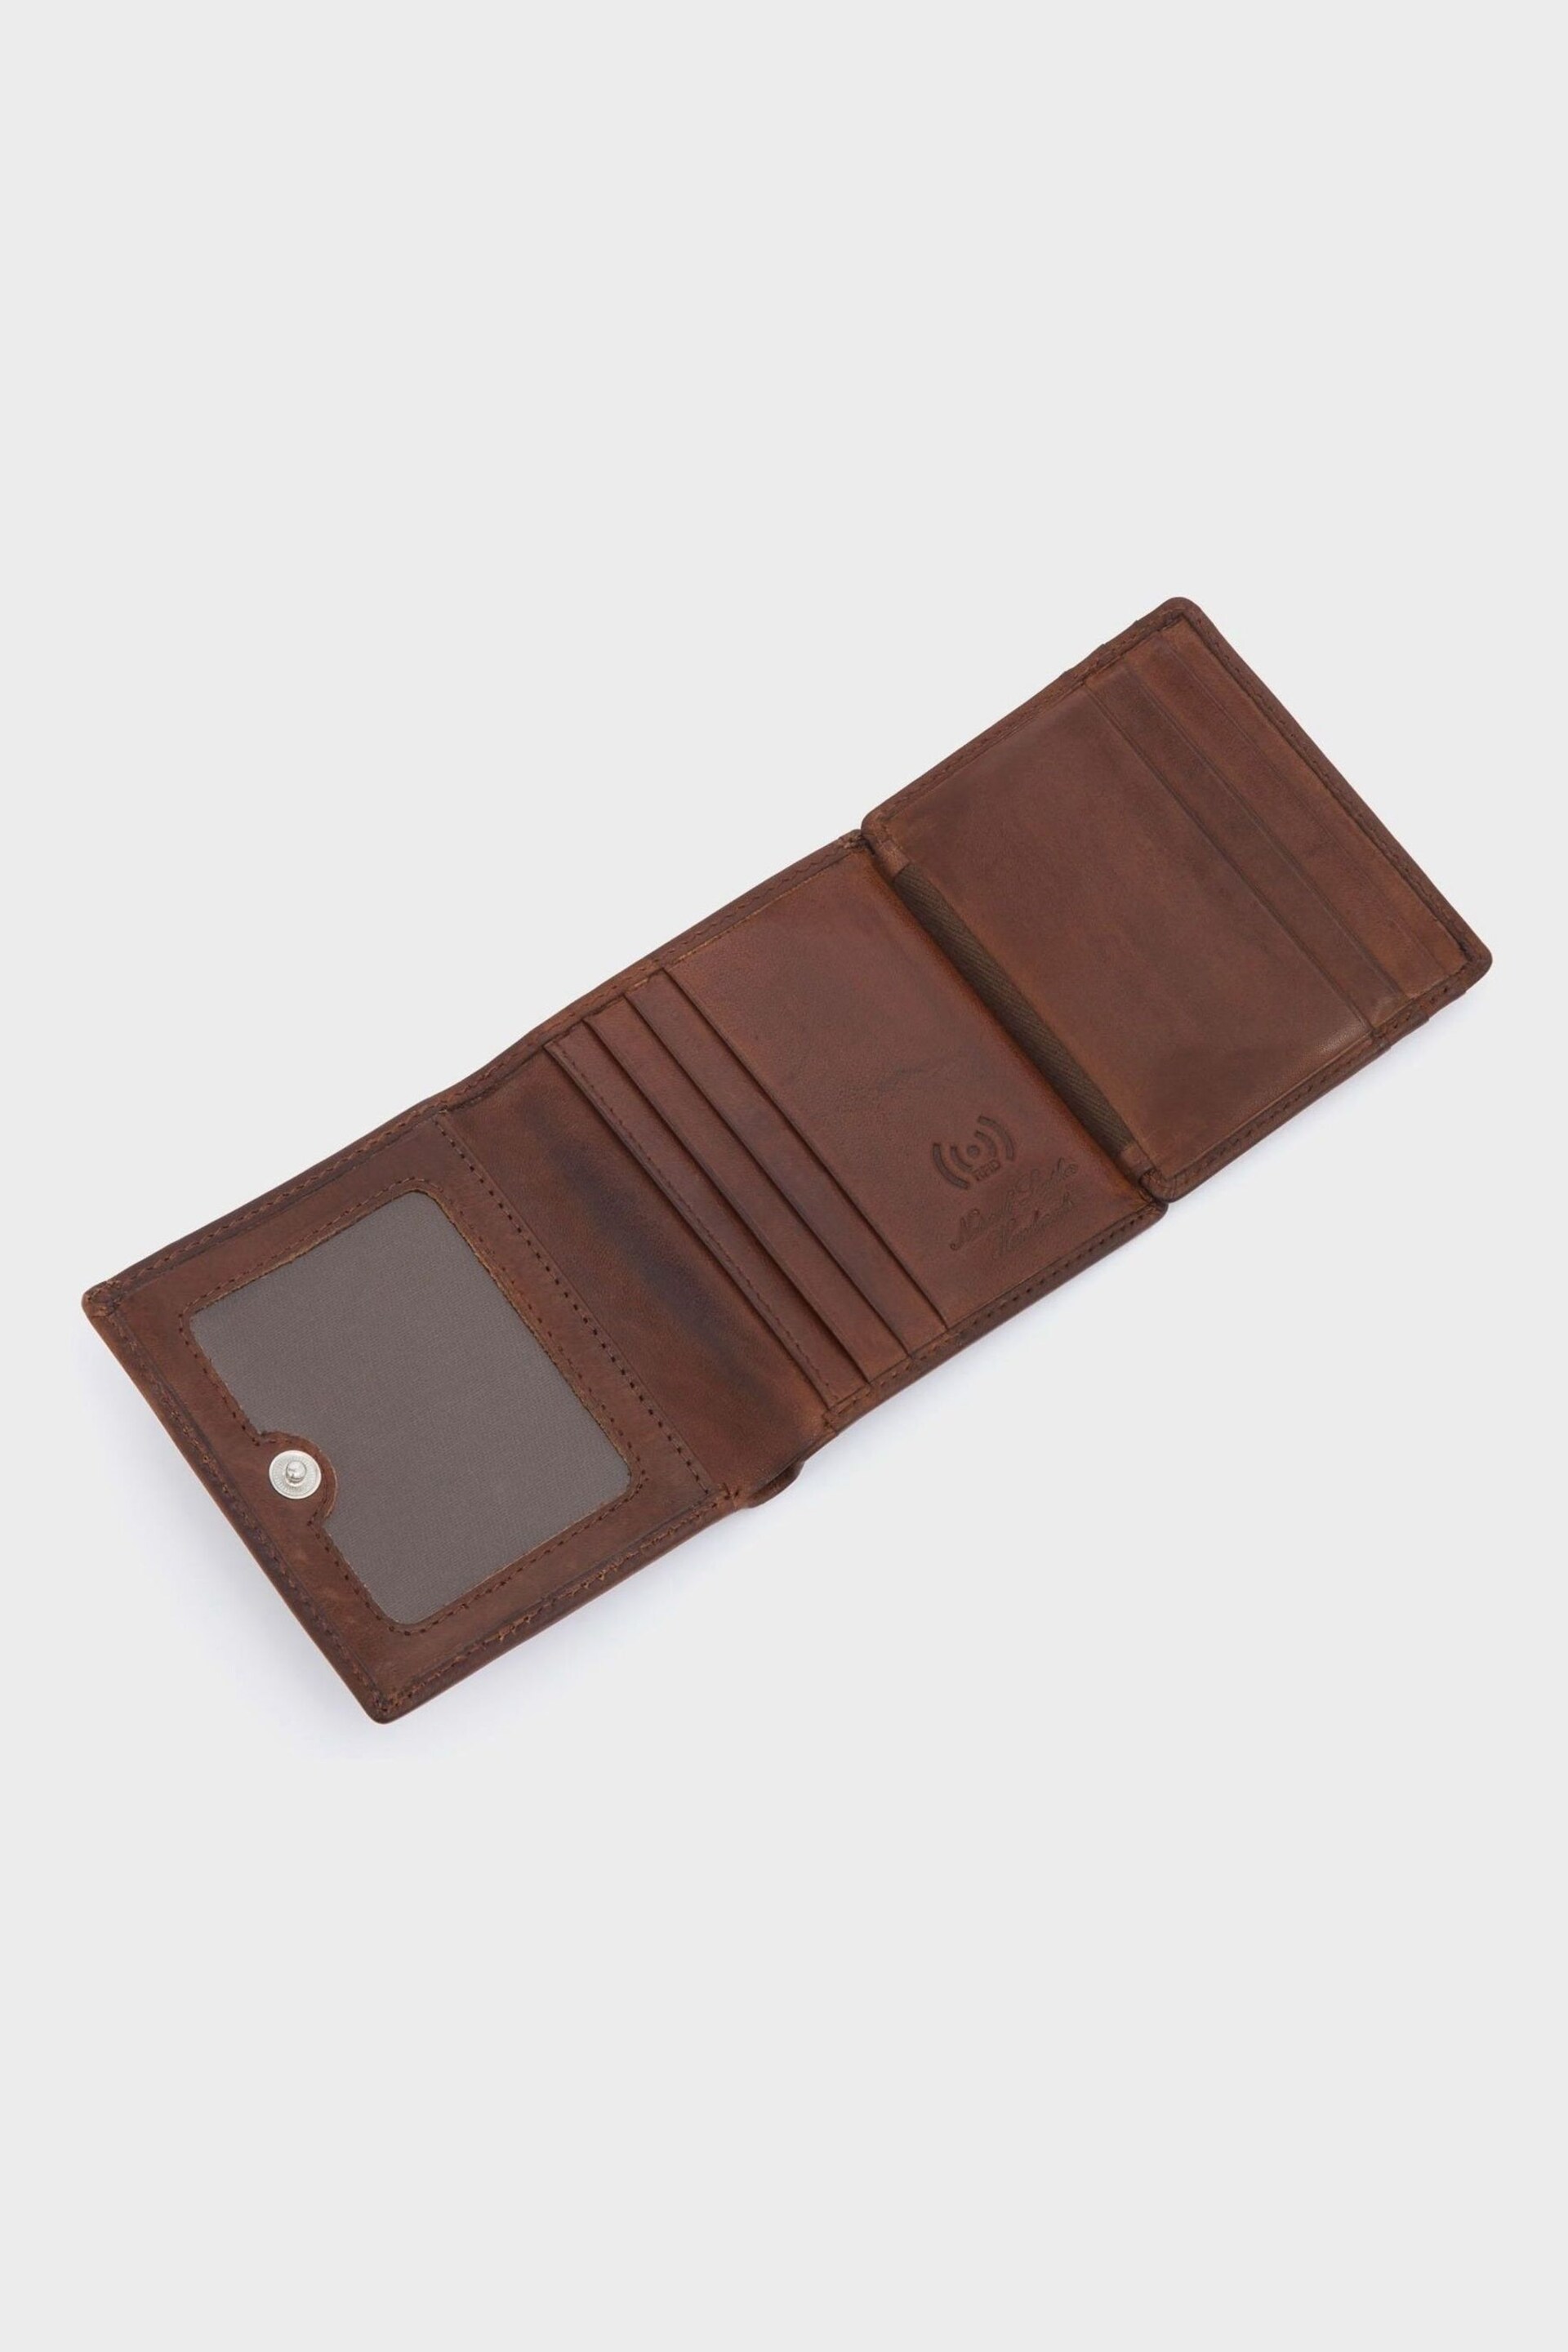 OSPREY LONDON The X Stitch Leather RFID ID Cardholder Brown Wallet - Image 4 of 6